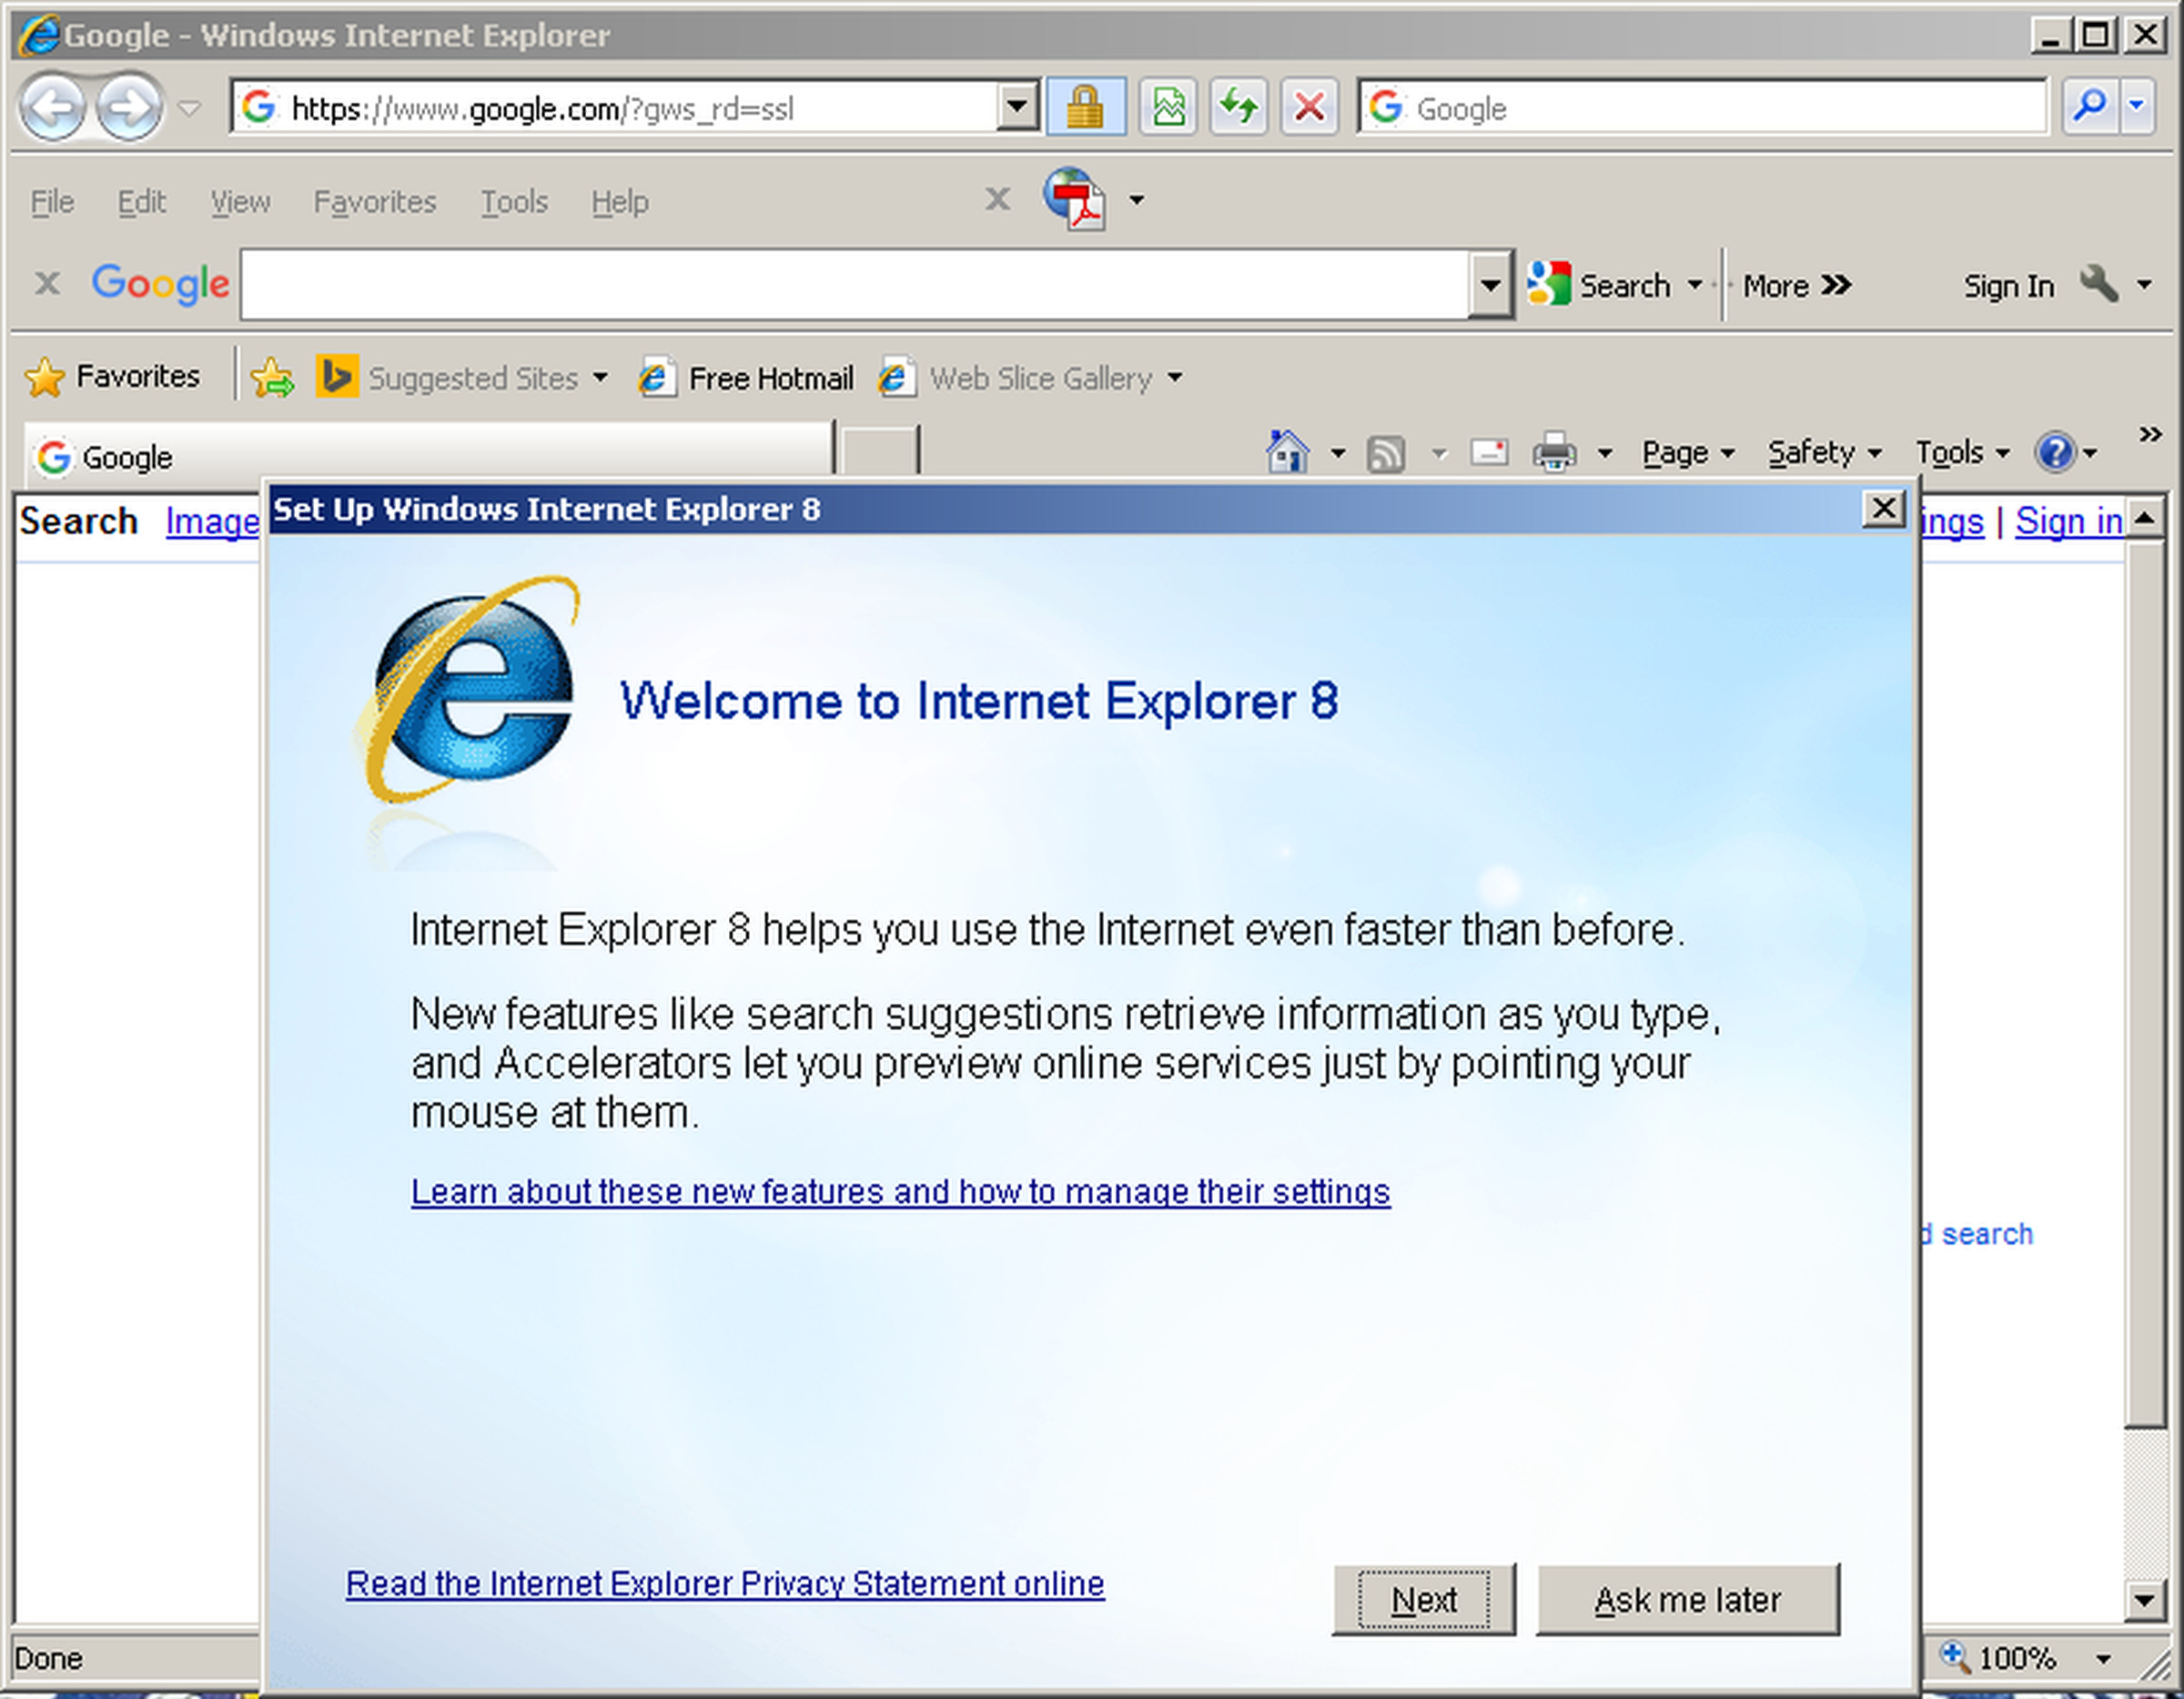 Internet Explorer 8 (released in 2009) on Windows XP. You could do a Google search in the Google Toolbar, the IE8 search field, or the Google website — the choice is yours.